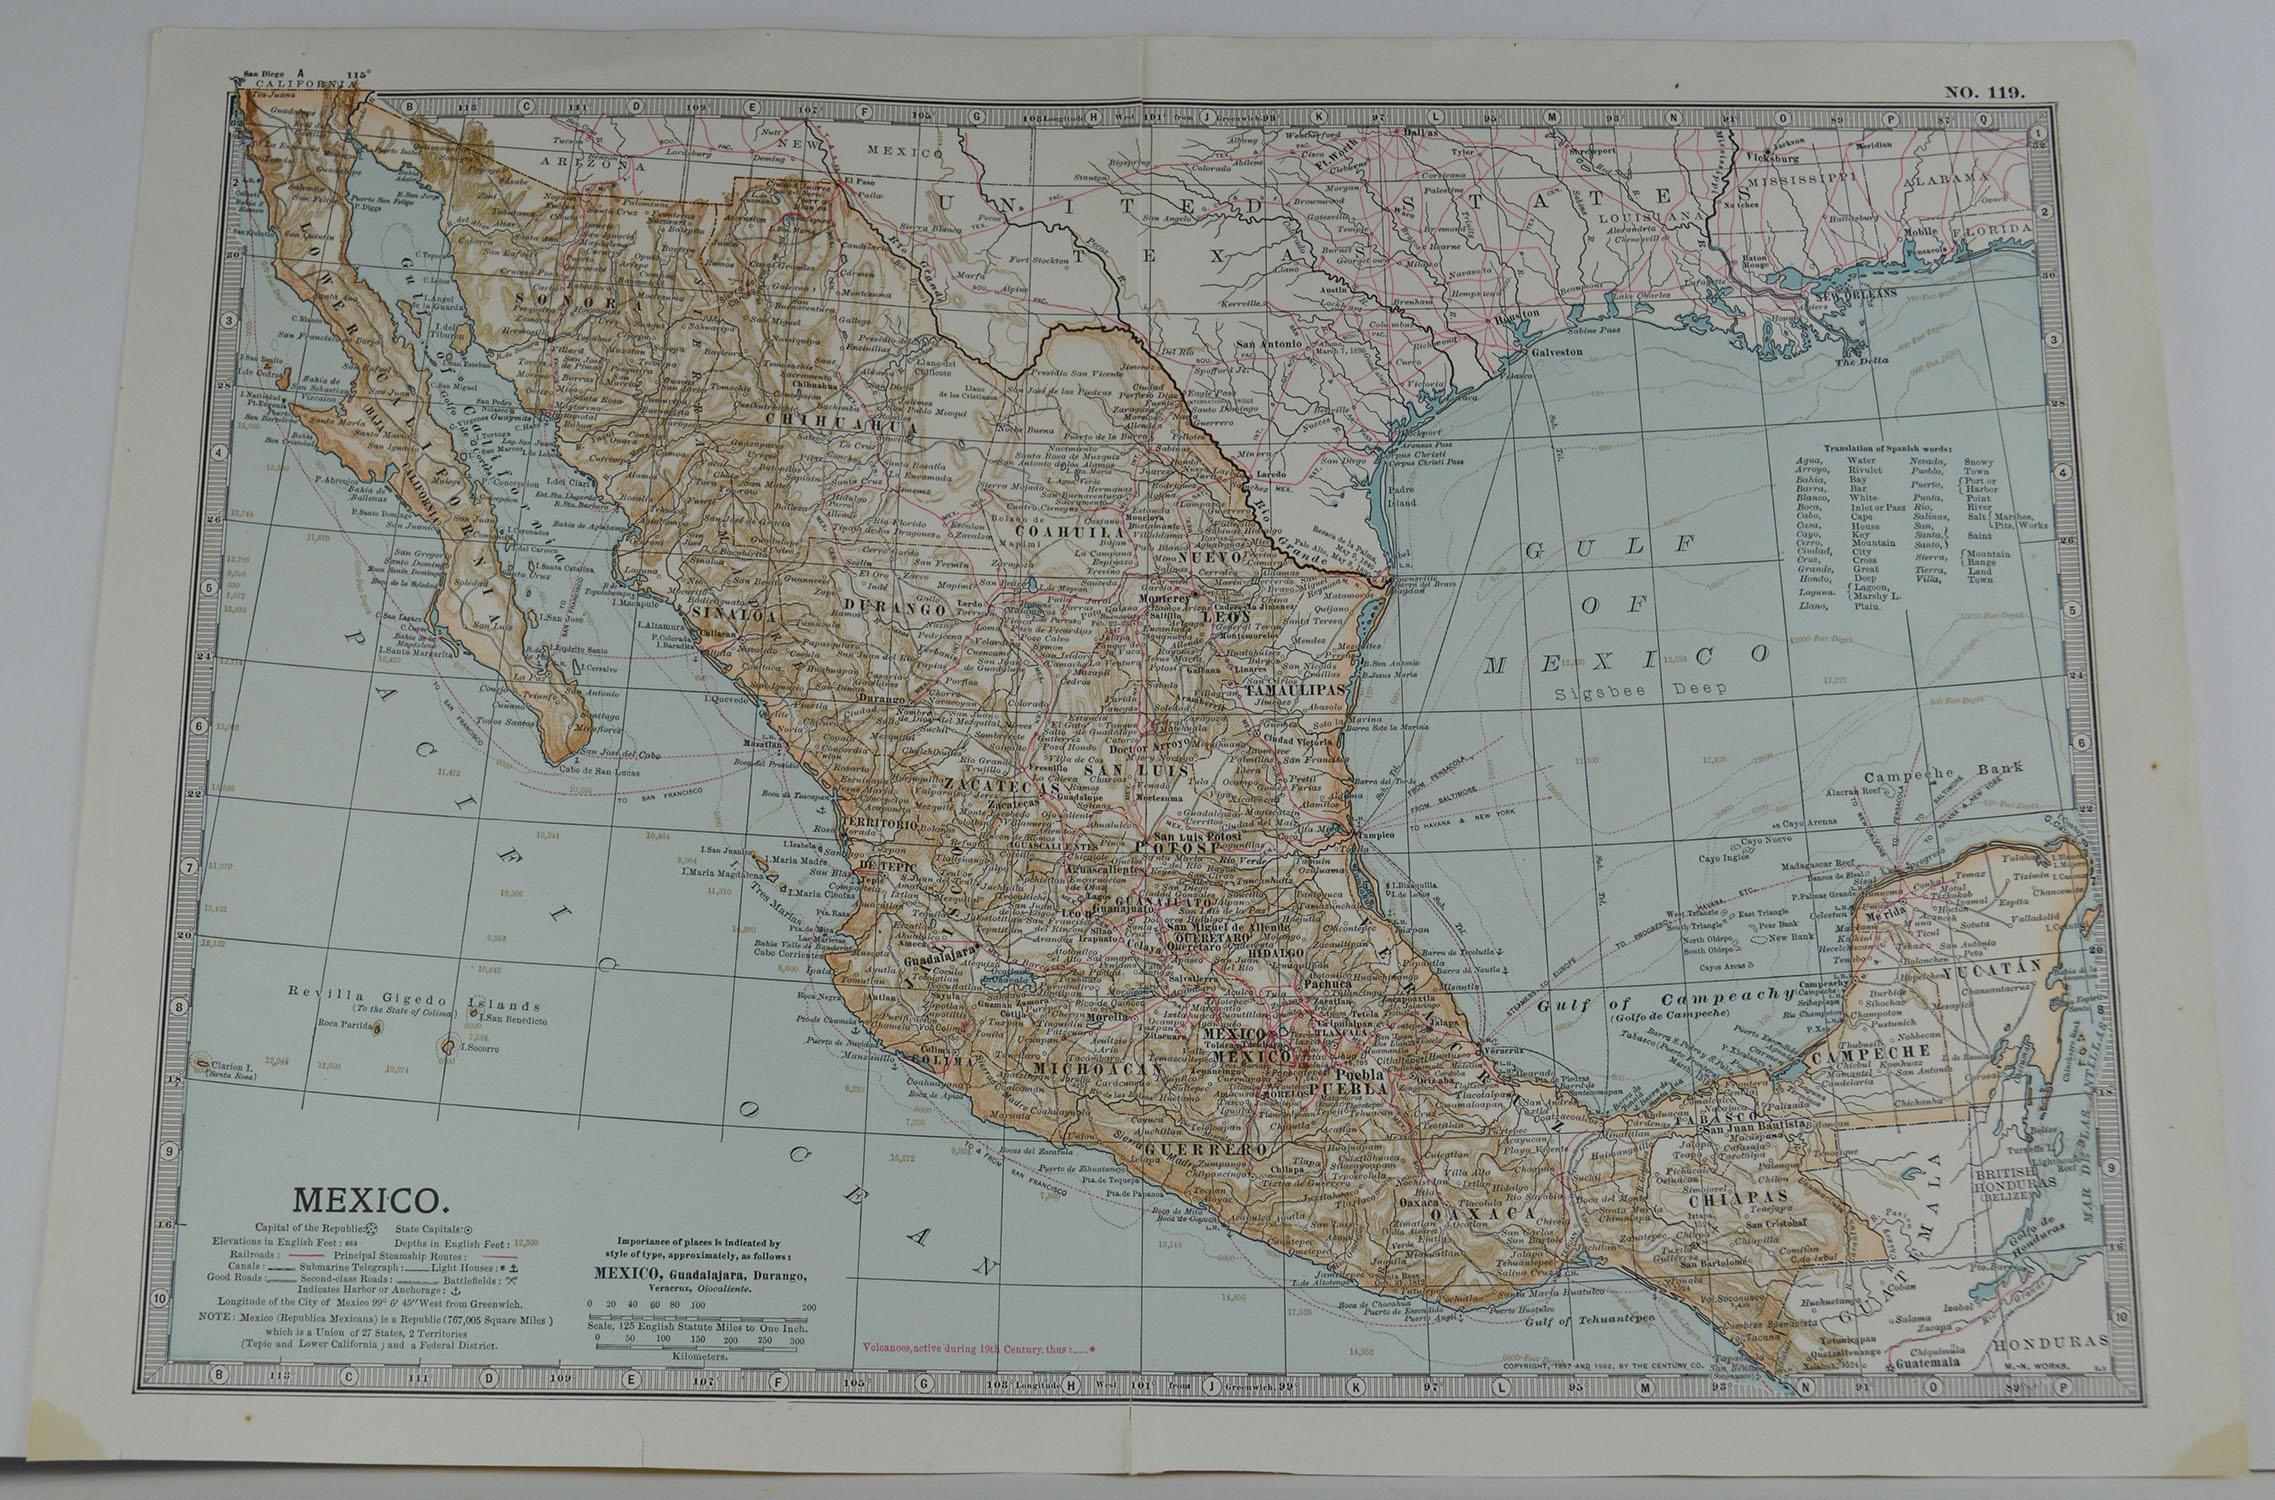 Great map of Mexico

Original color.

Published circa 1890

Repair to minor edge tear

Unframed.
 